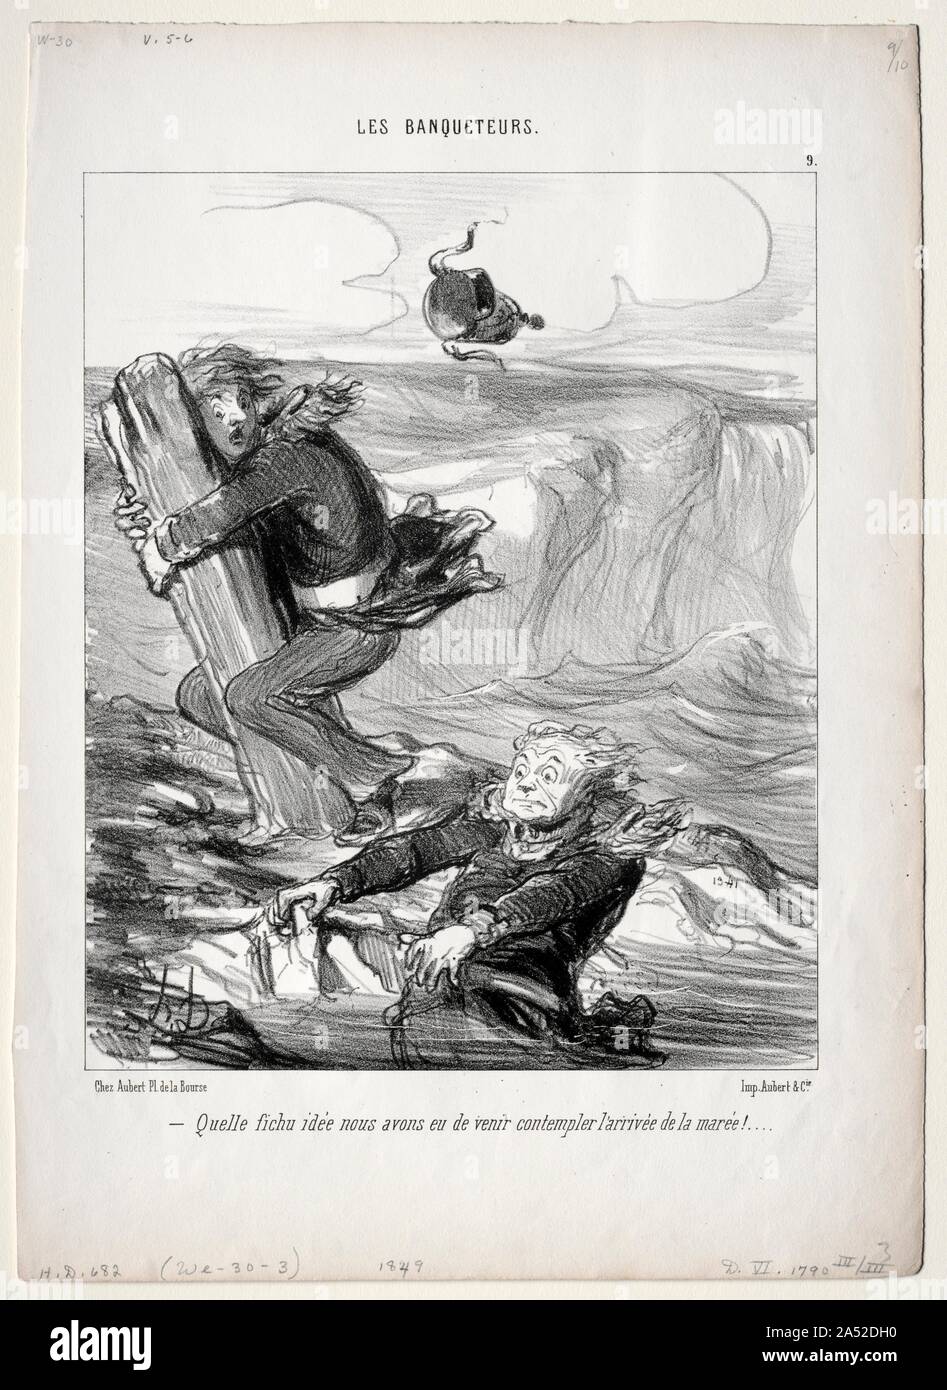 The Banqueters, plate 9: What a pitiful idea we have..., 1849. Stock Photo